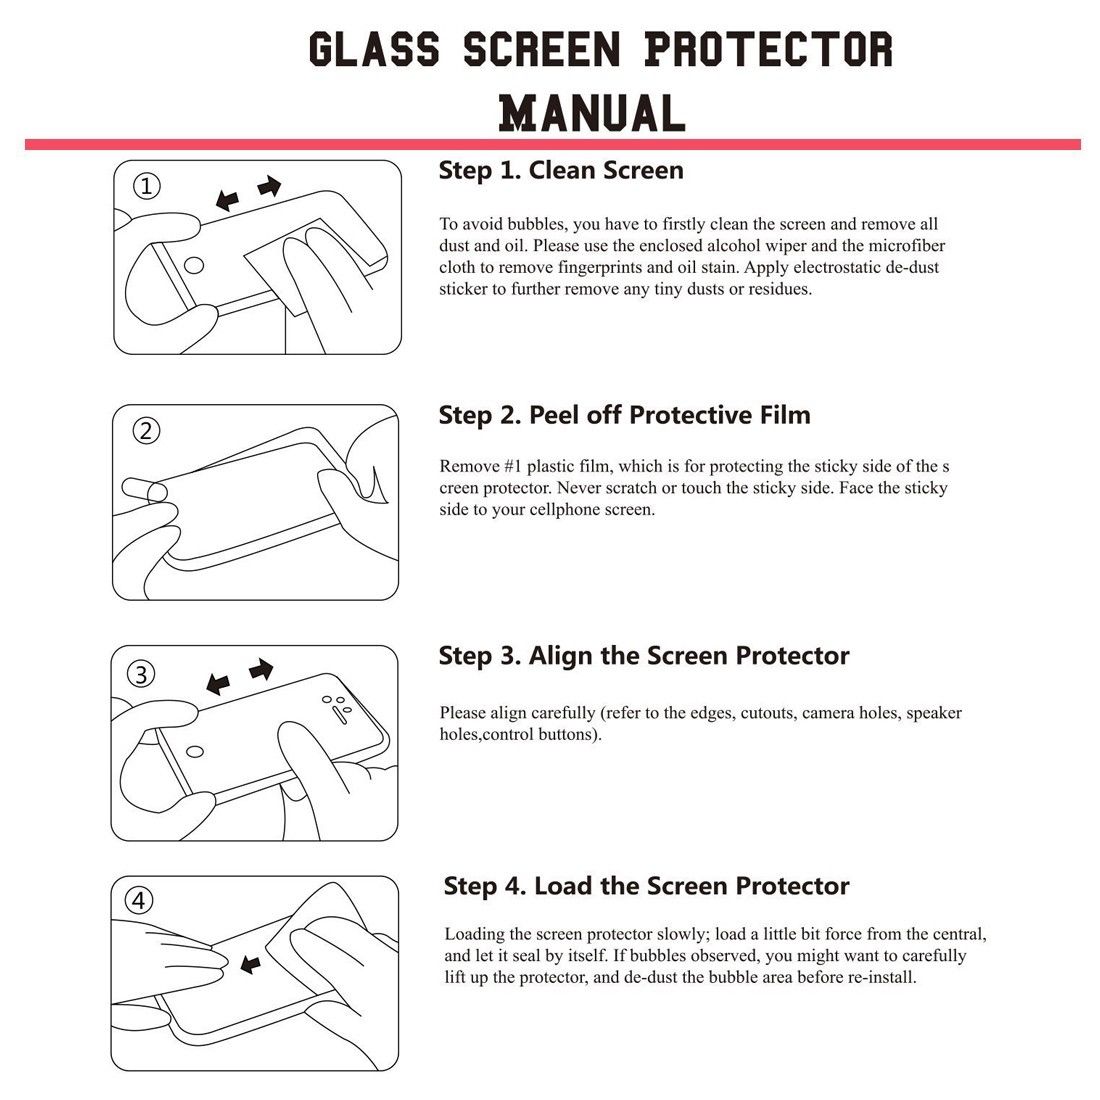 OnePlus 6T Premium Tempered Glass for [product_price] - First Help Tech